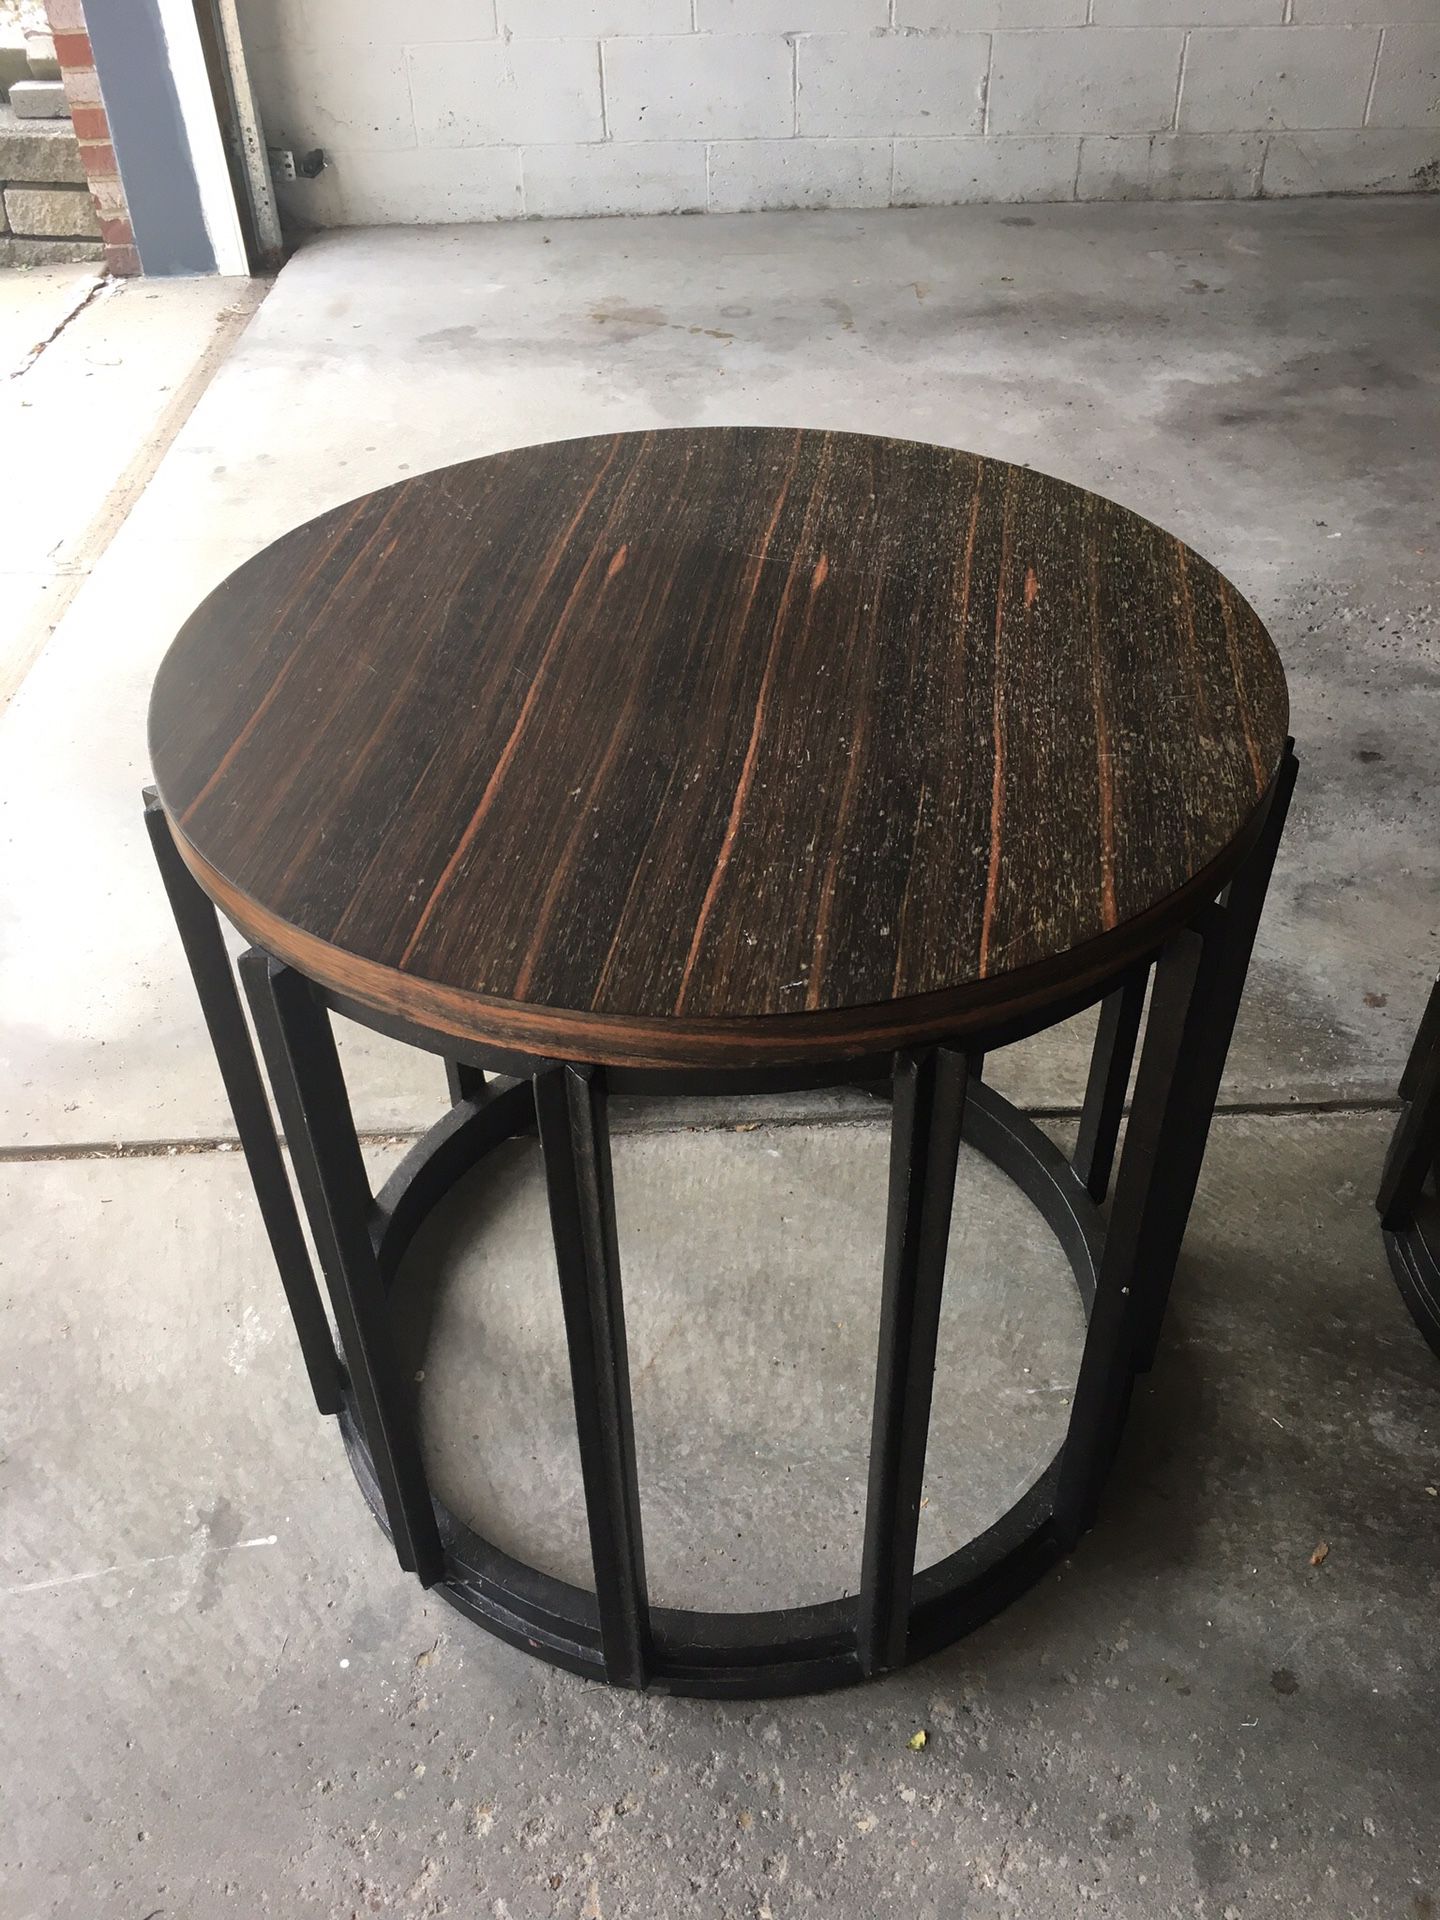 Buy 1 get 1 free large round end table